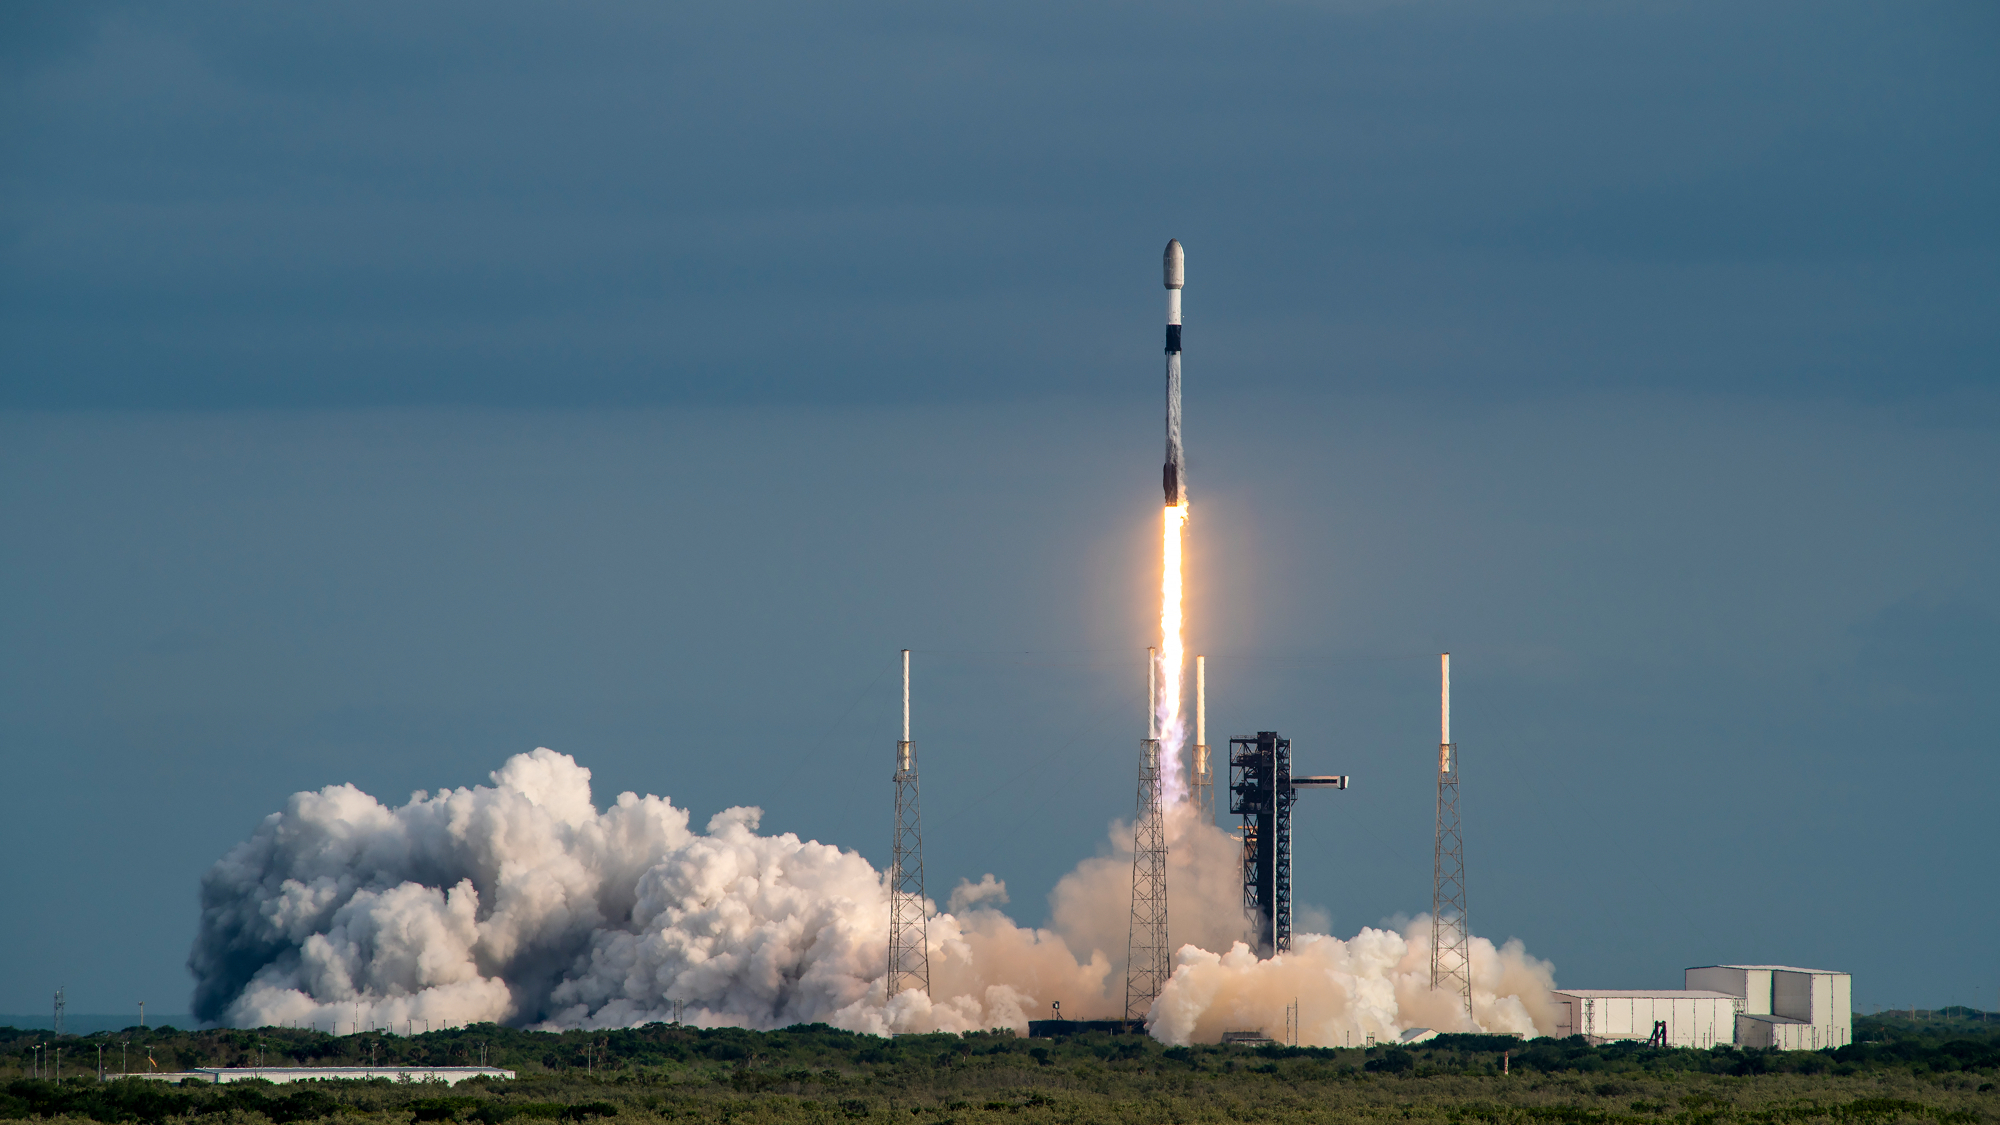 SpaceX launching Falcon 9 rocket on record-tying 20th mission today Space